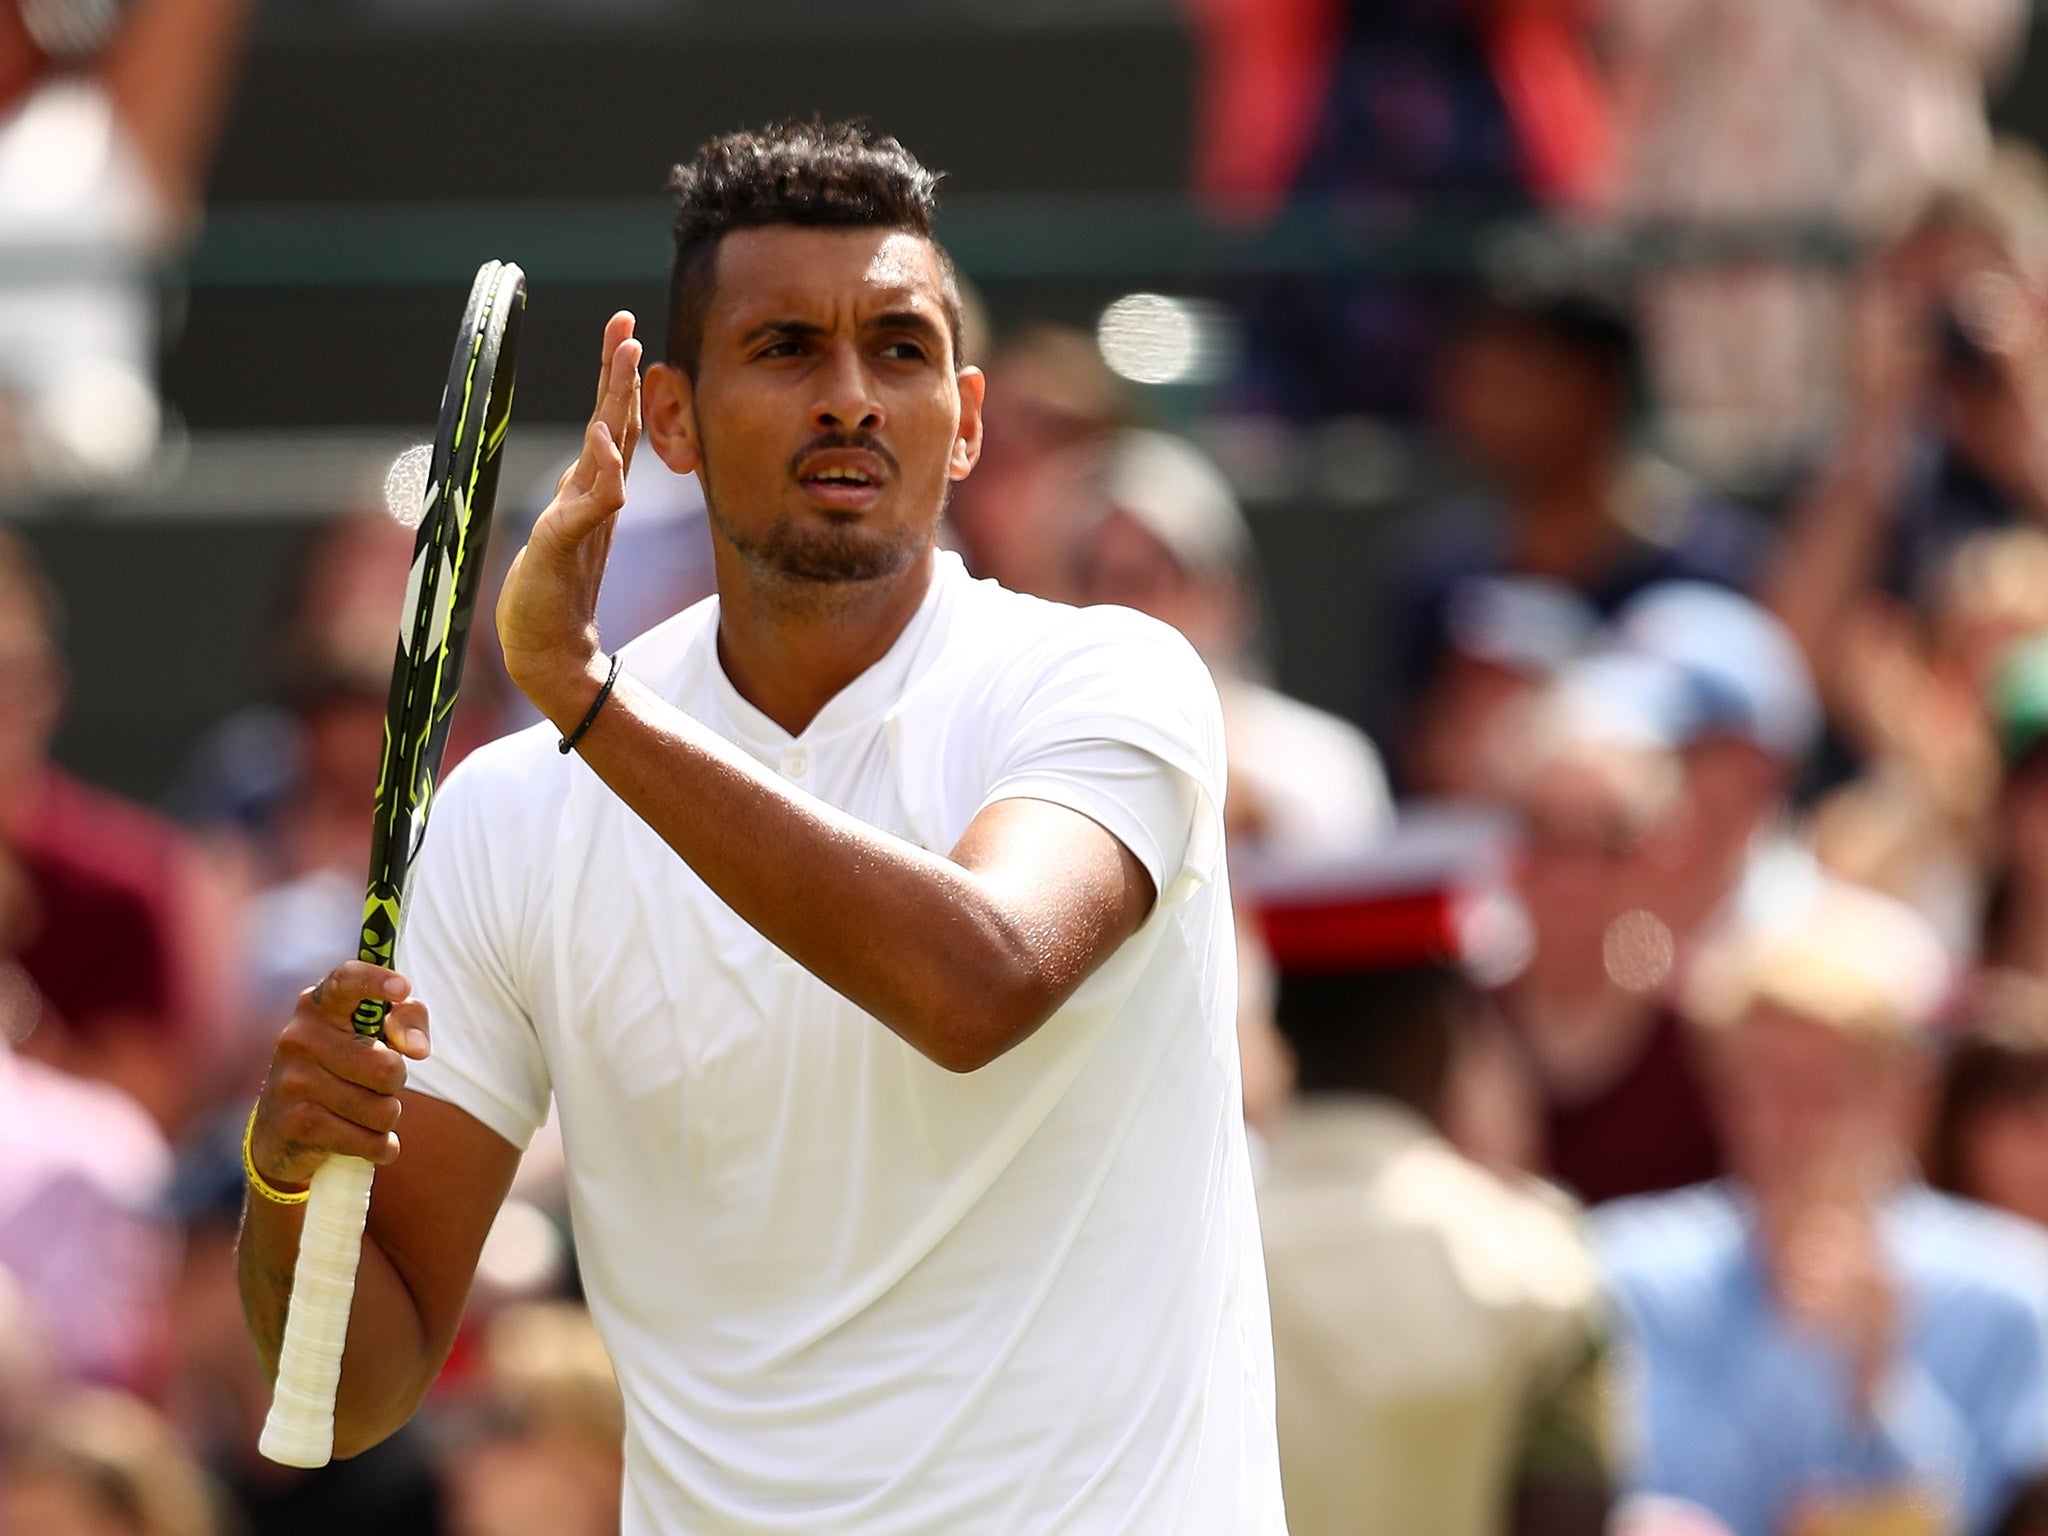 Nick Kyrgios applauds the crowd after beating Feliciano Lopez at Wimbledon